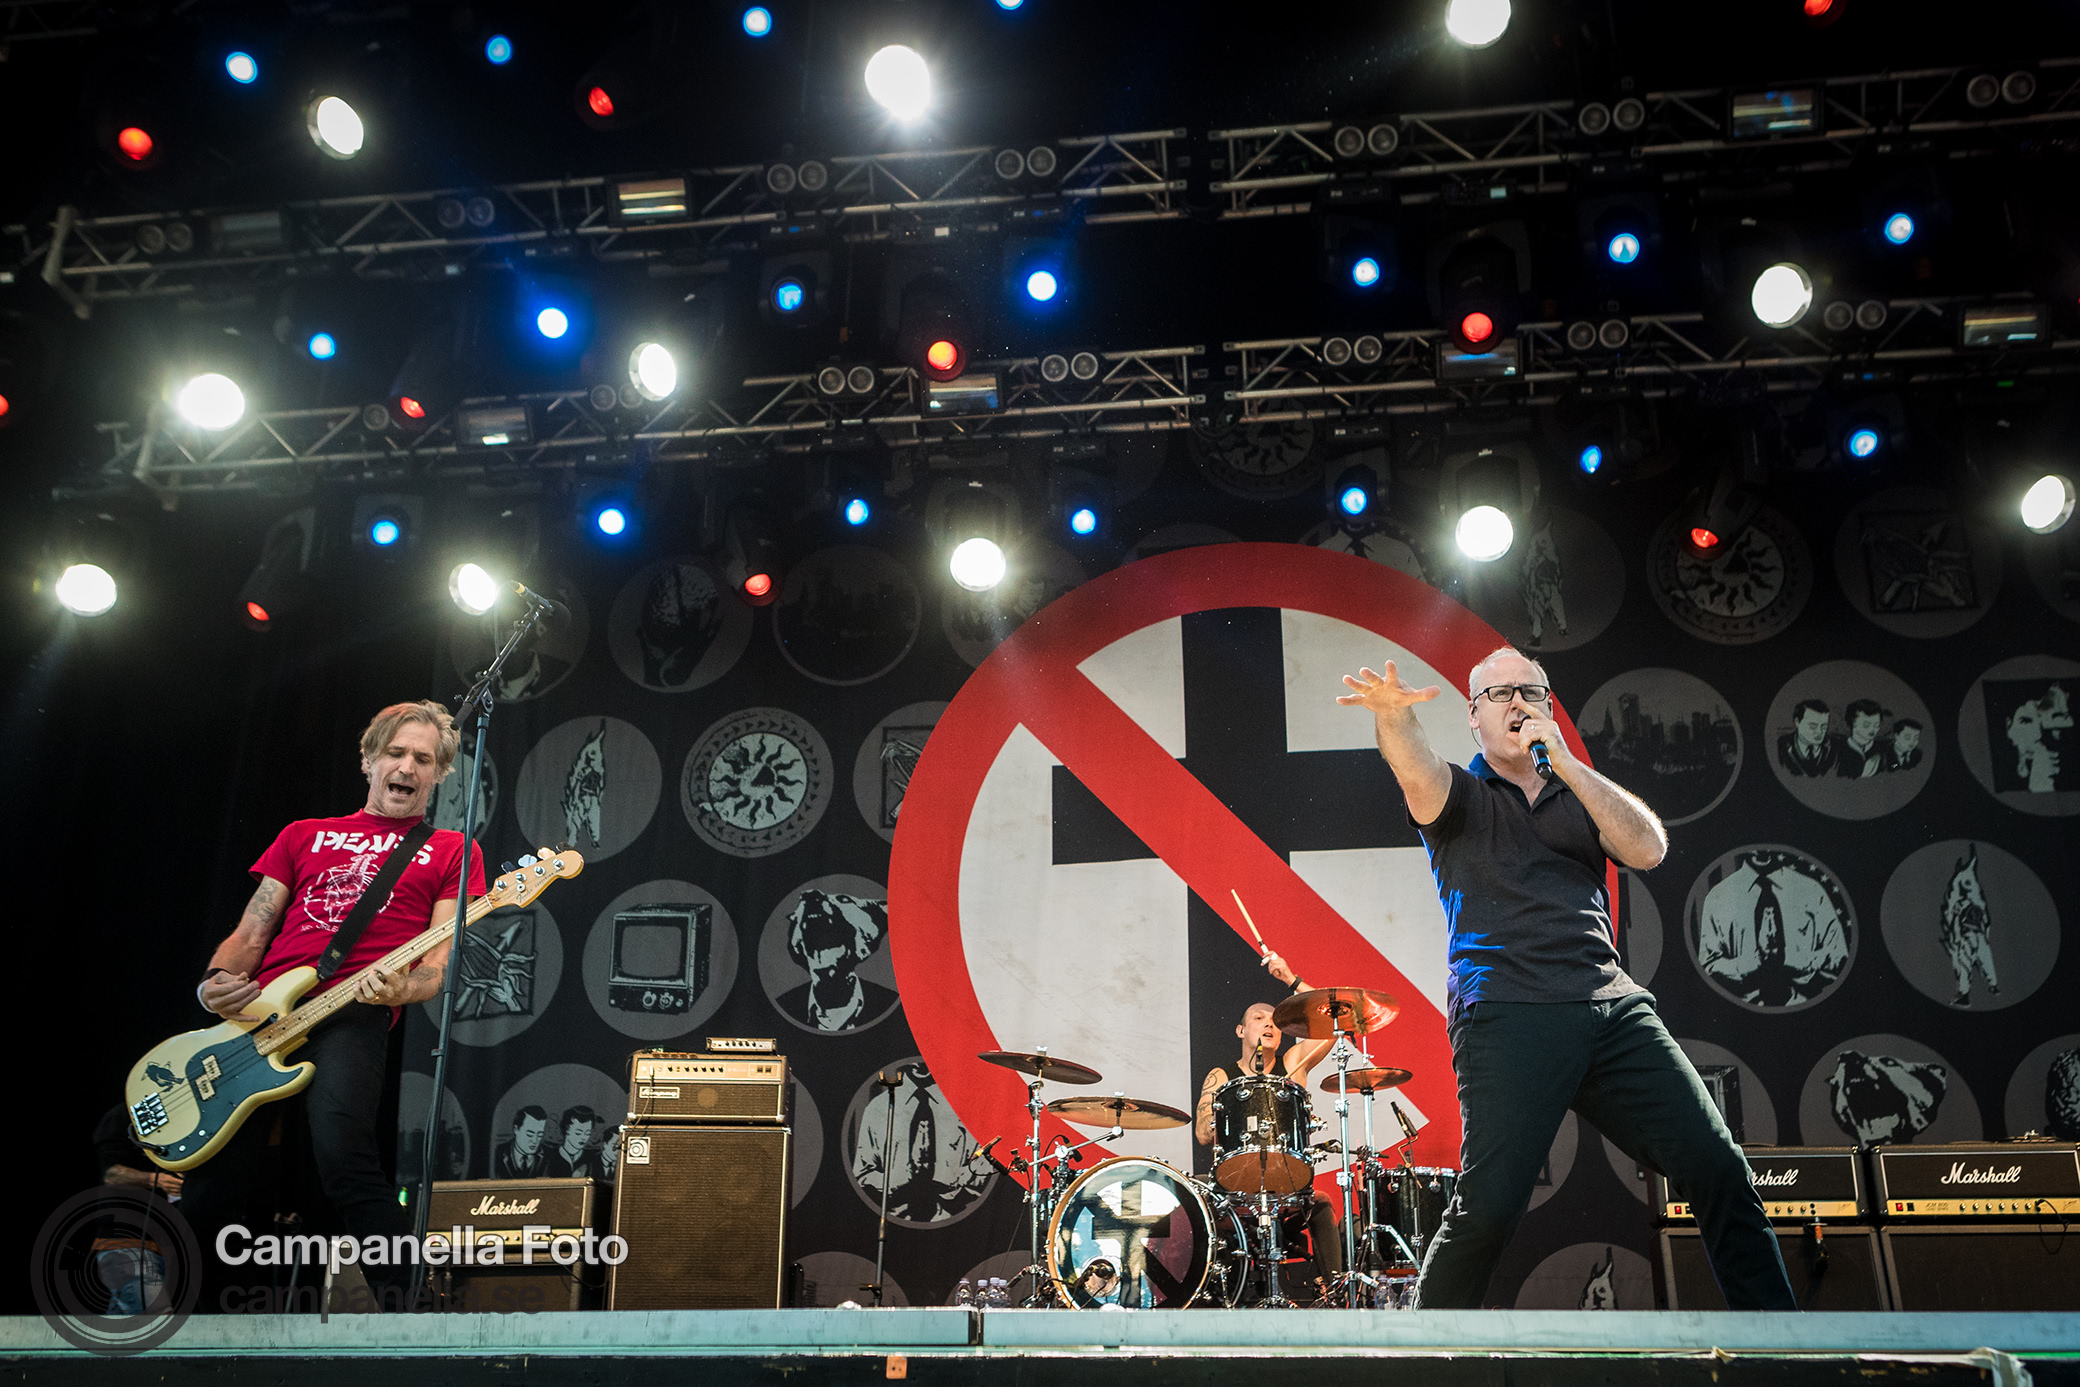 Bad Religion performs in Stockholm - Michael Campanella Photography